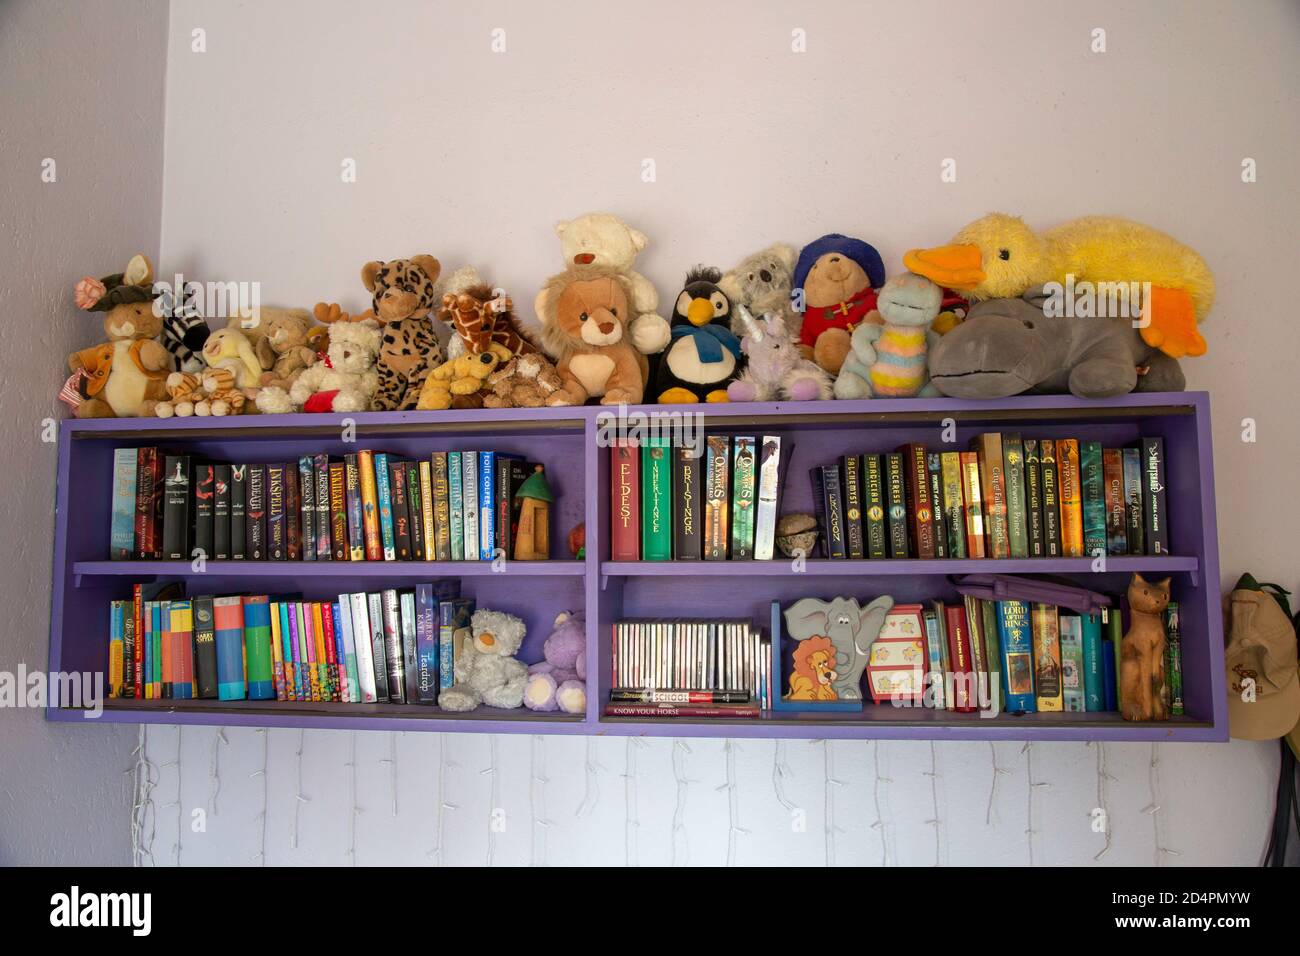 Shelf with books and soft fluffy toys in a children's bedroom Stock Photo